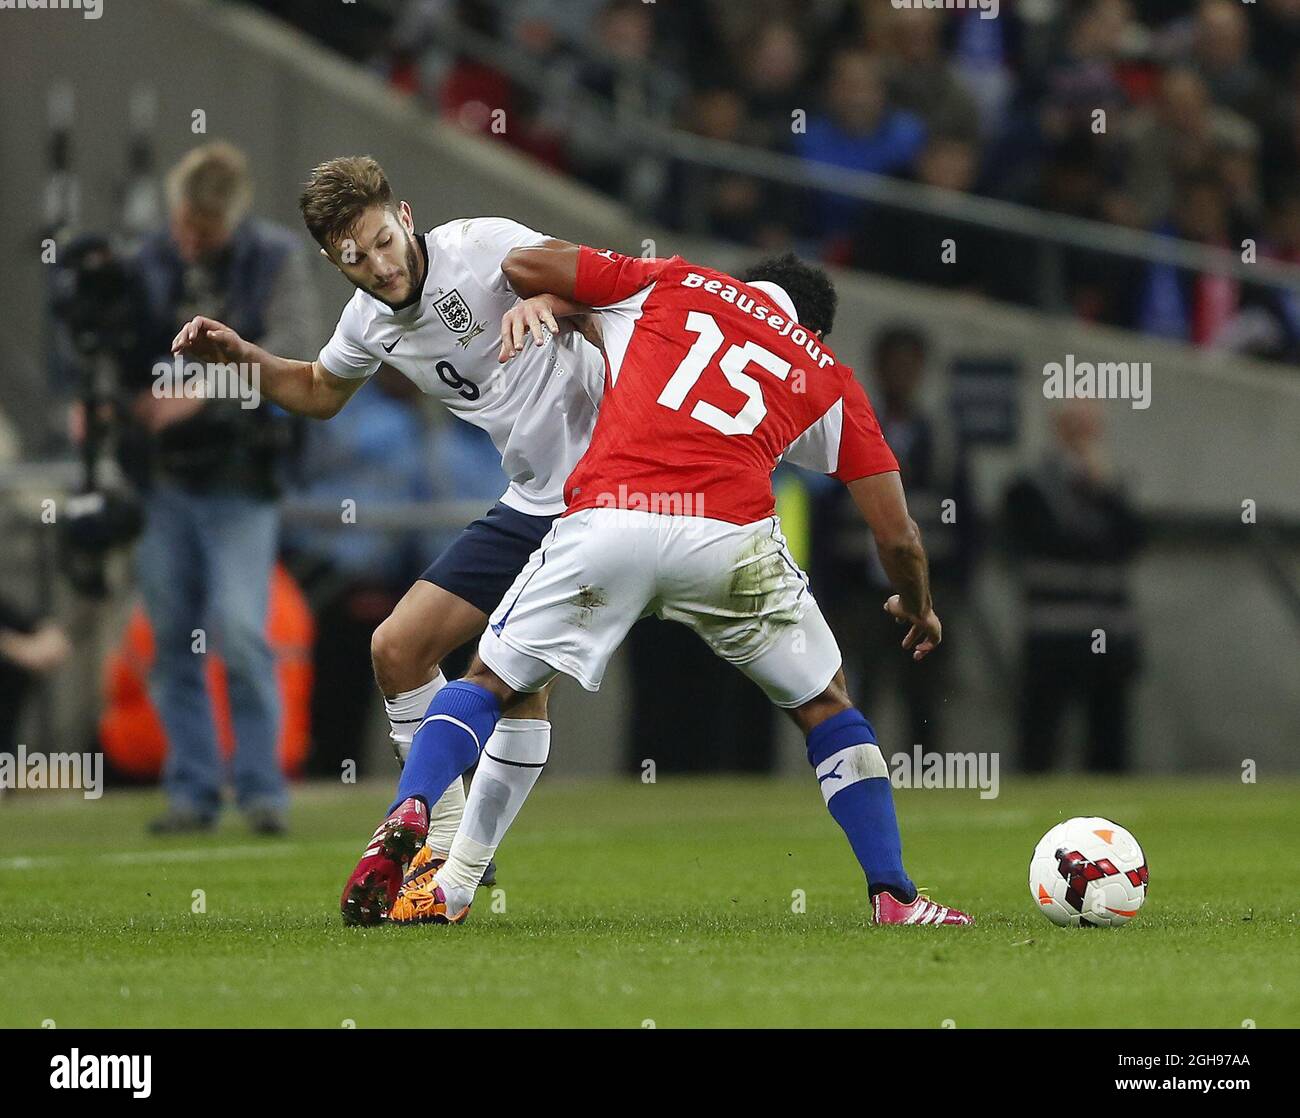 England's Adam lallana tussles with Chile's Jean Beausejour during the International Friendly match between England and Chile held at the Wembley Stadium in London, England on Nov. 15, 2013. Stock Photo